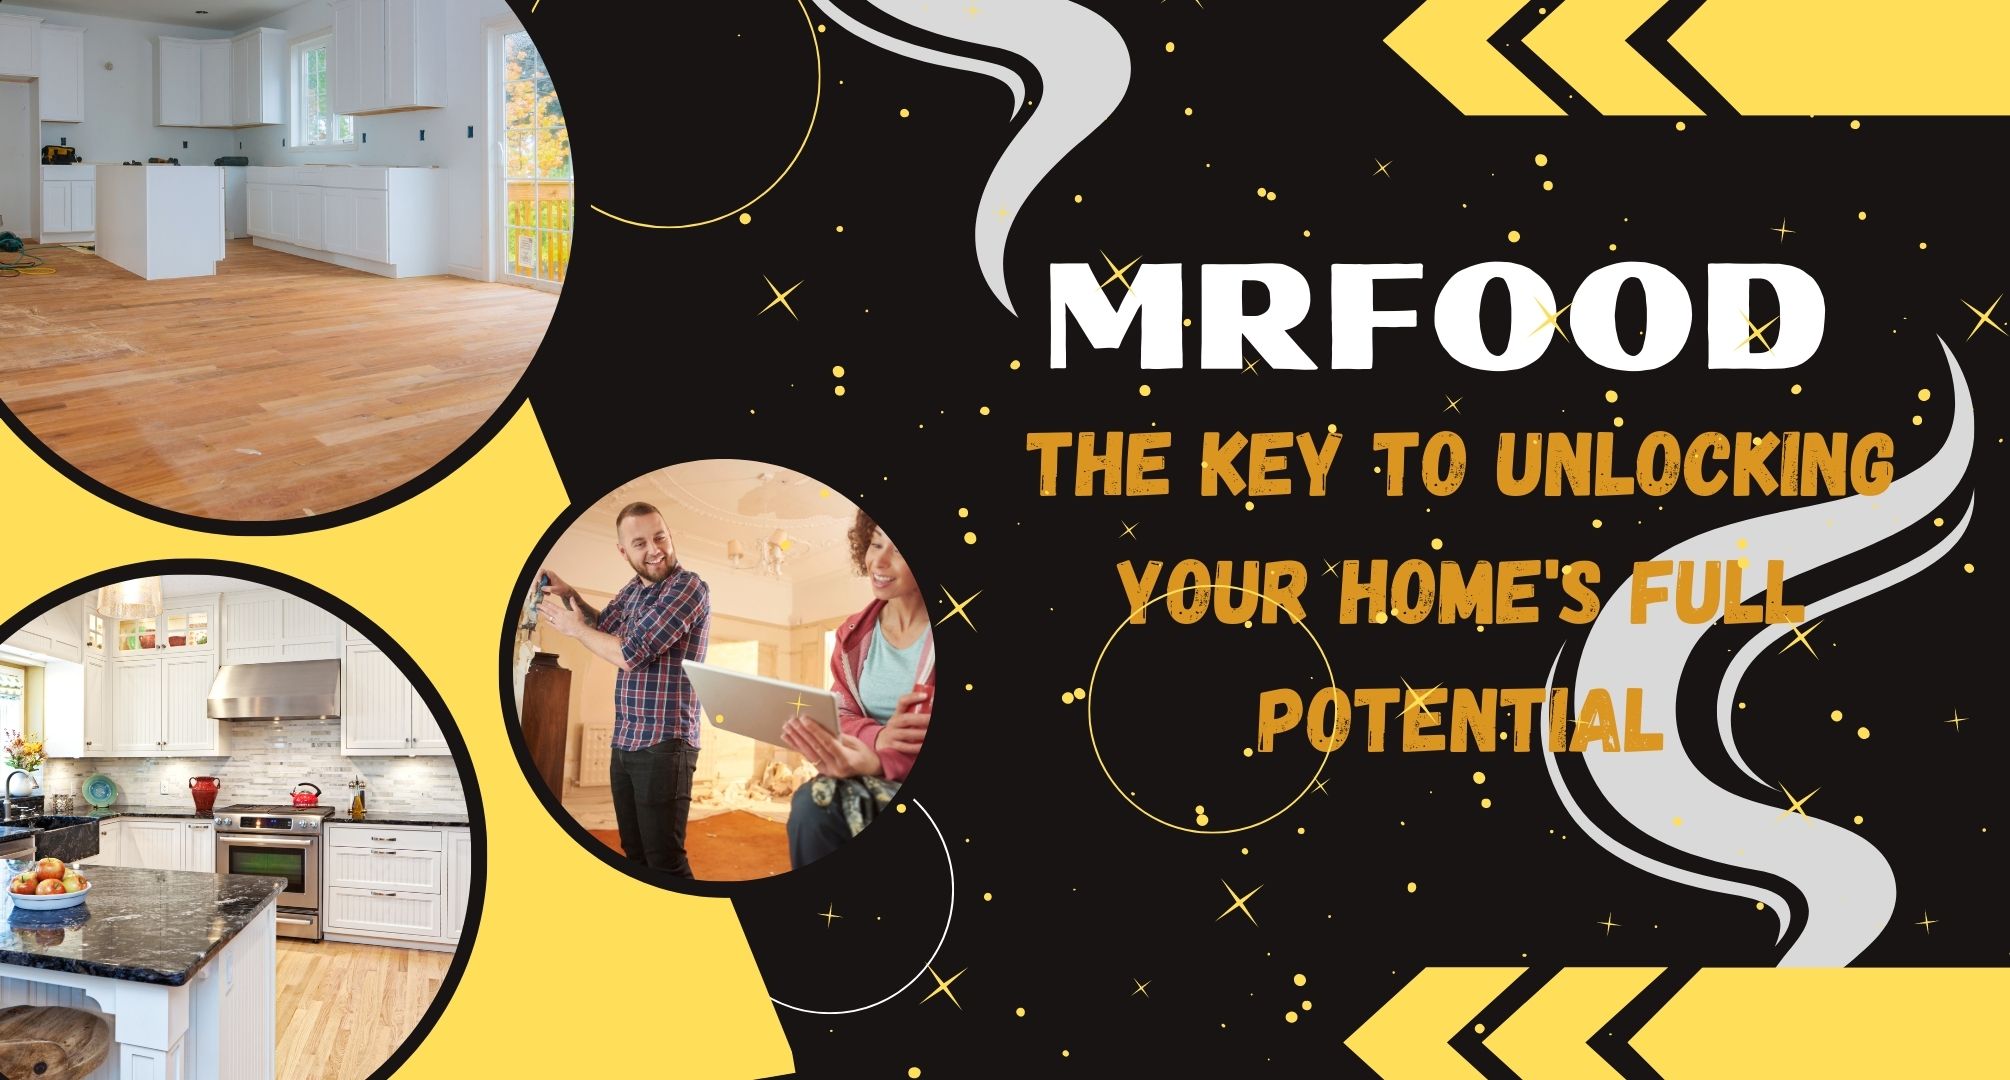 From the Kitchen to the Living Room: How MrFood's Expertise Can Enhance Your Home's Design and Functionality!